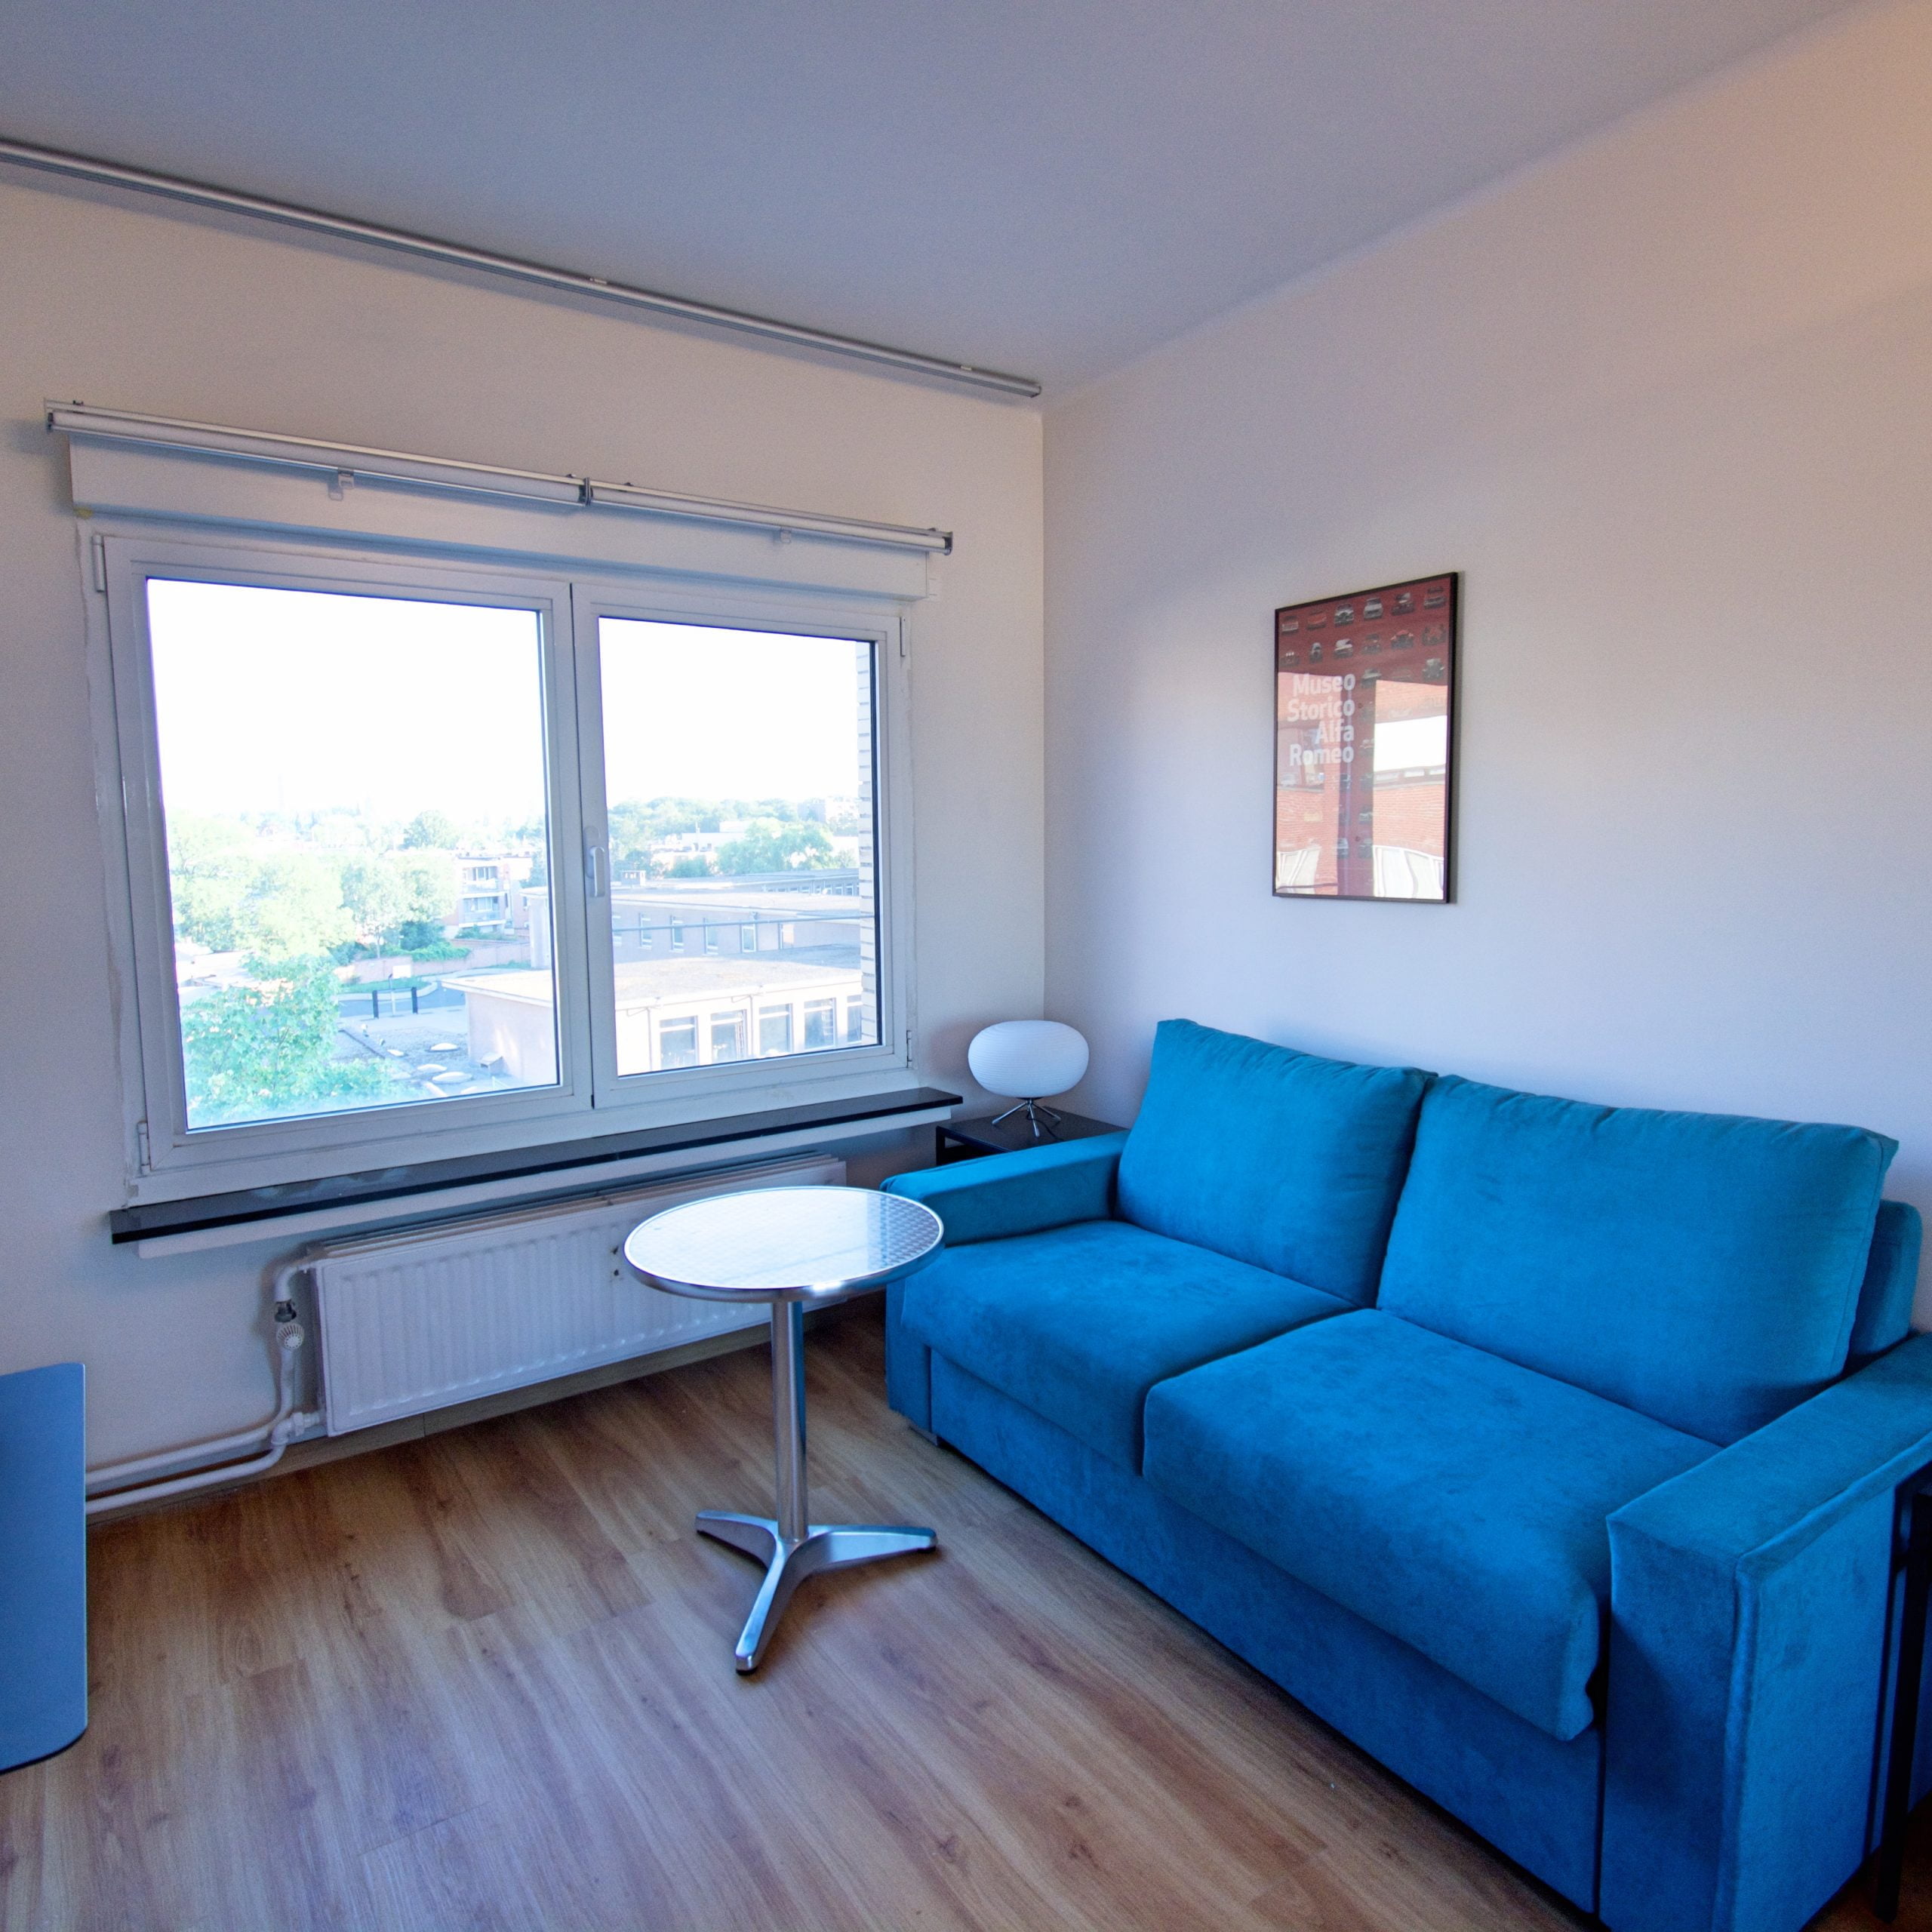 2 bedroom apartment in Antwerp for expats